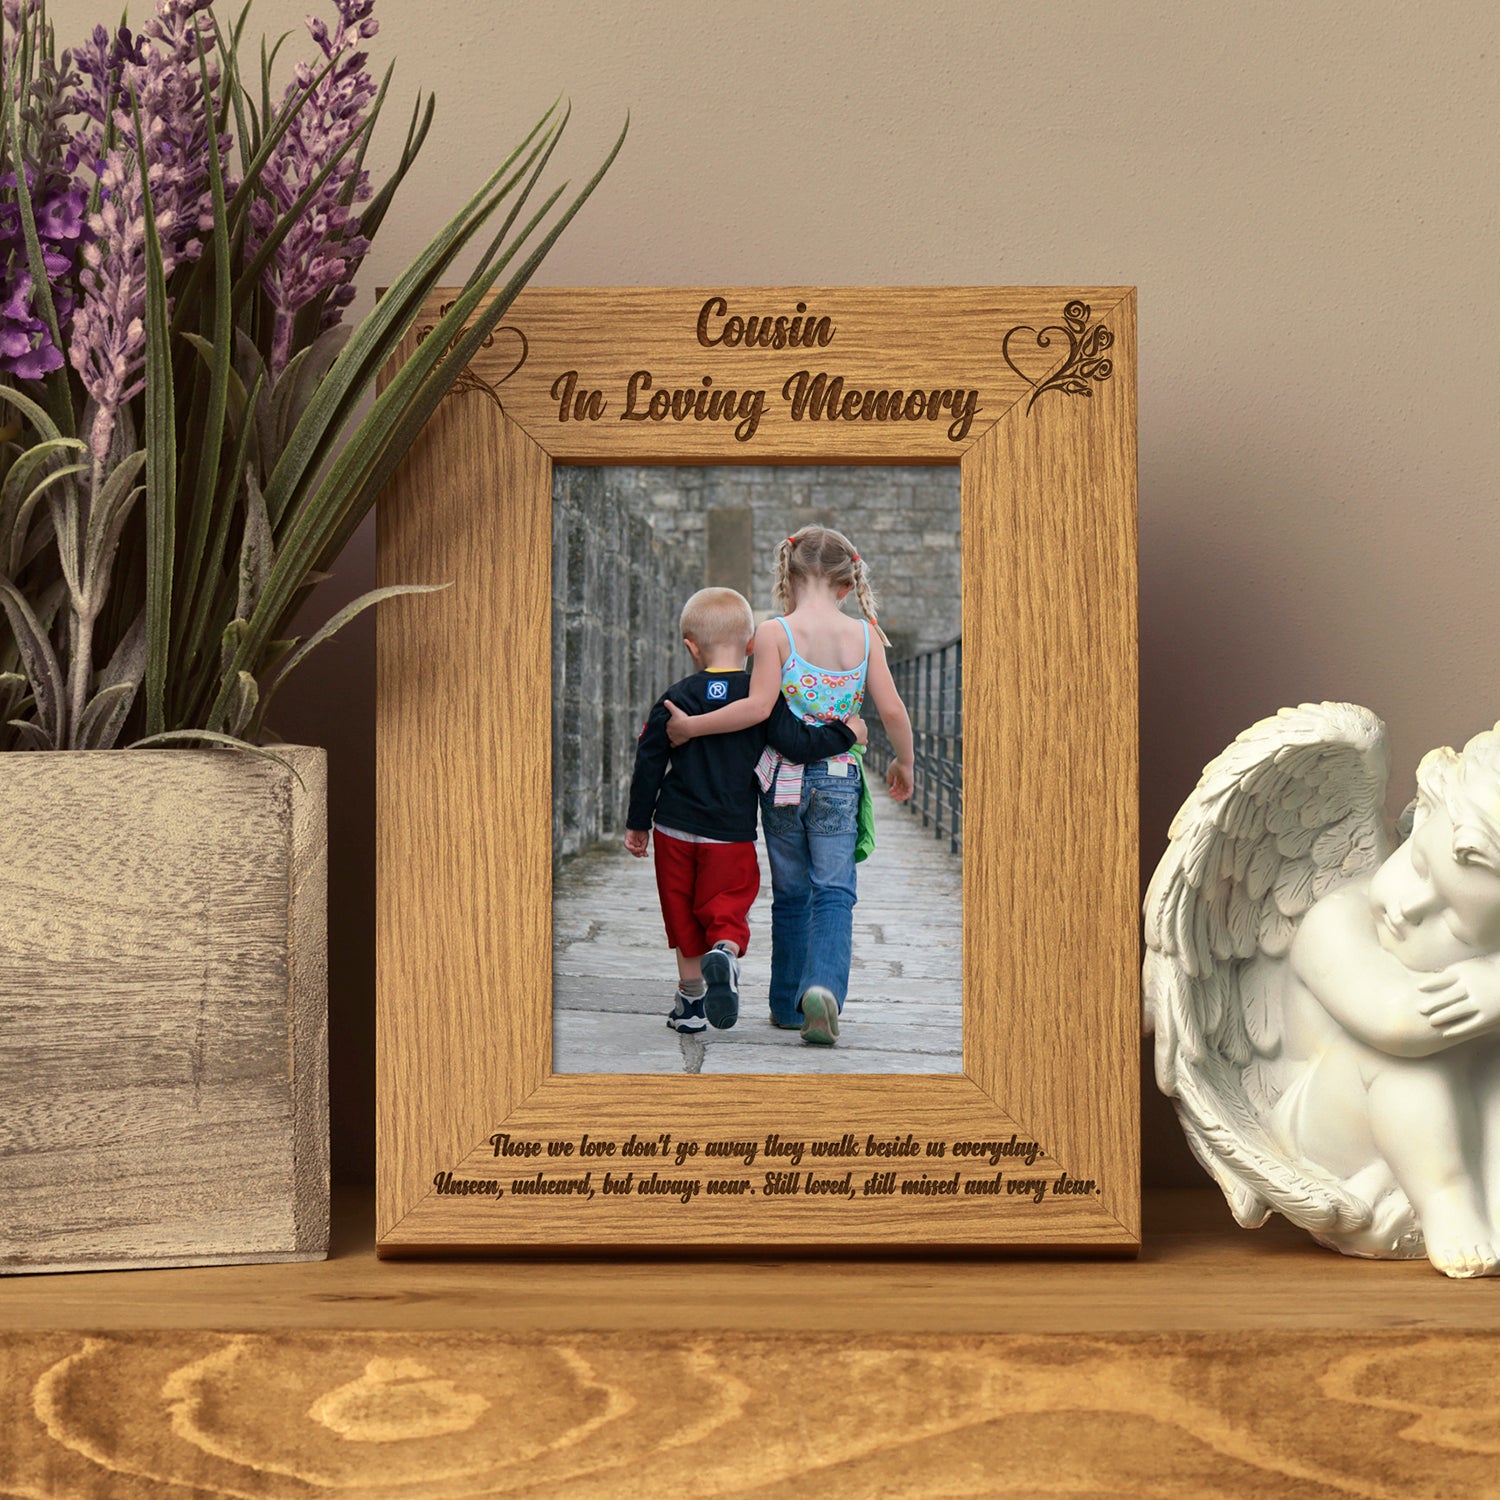 Cousin In Loving Memory Remembrance Portrait Wooden Photo Frame Gift  - ukgiftstoreonline